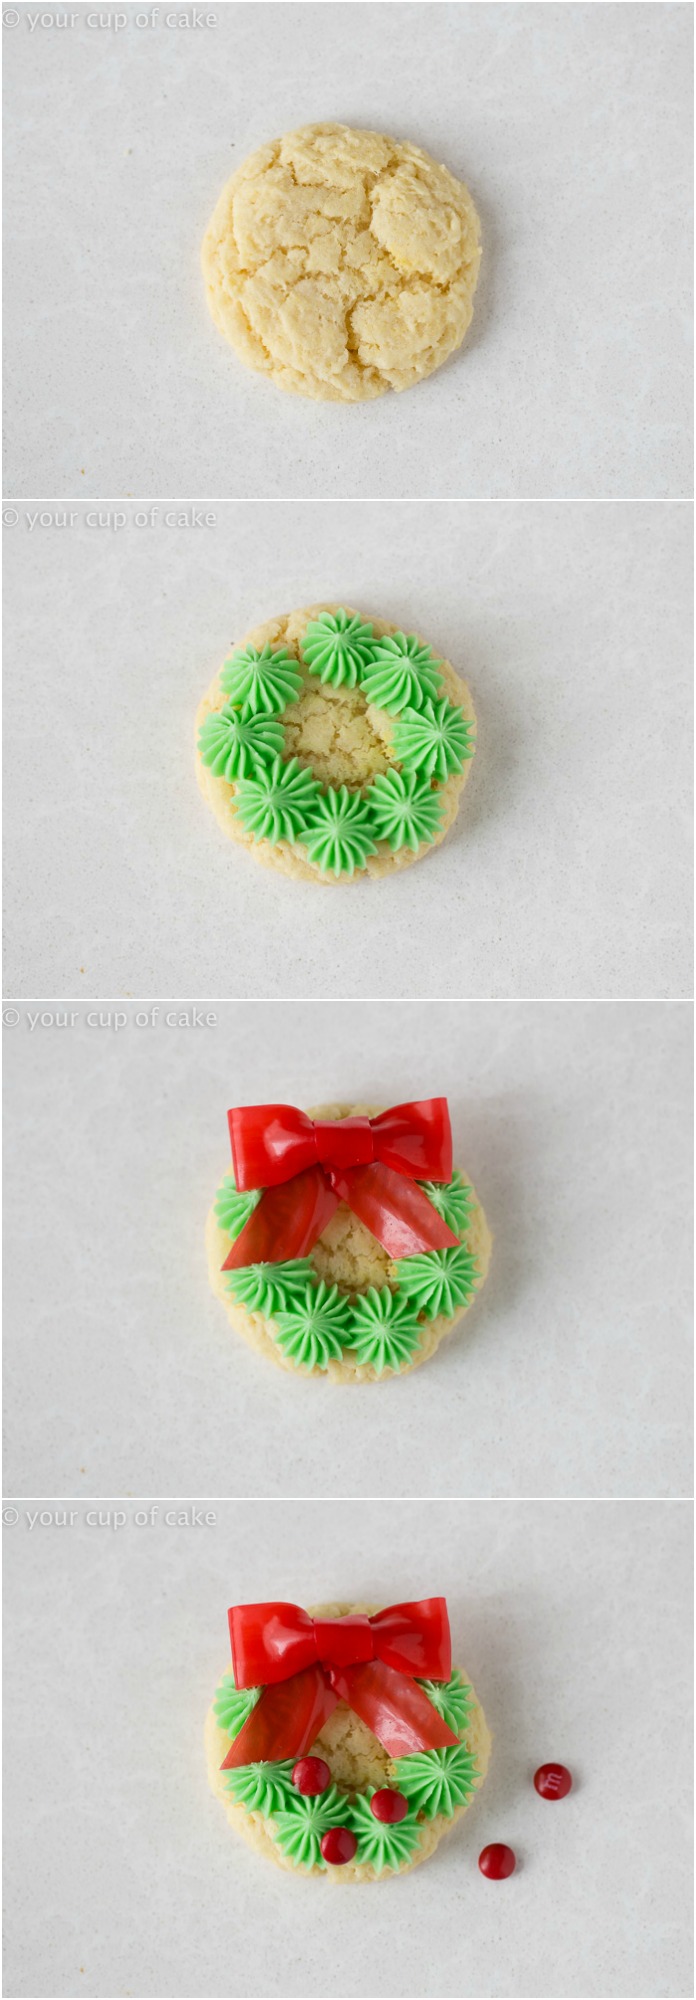 Easy Christmas Wreath Cookies - Your Cup of Cake